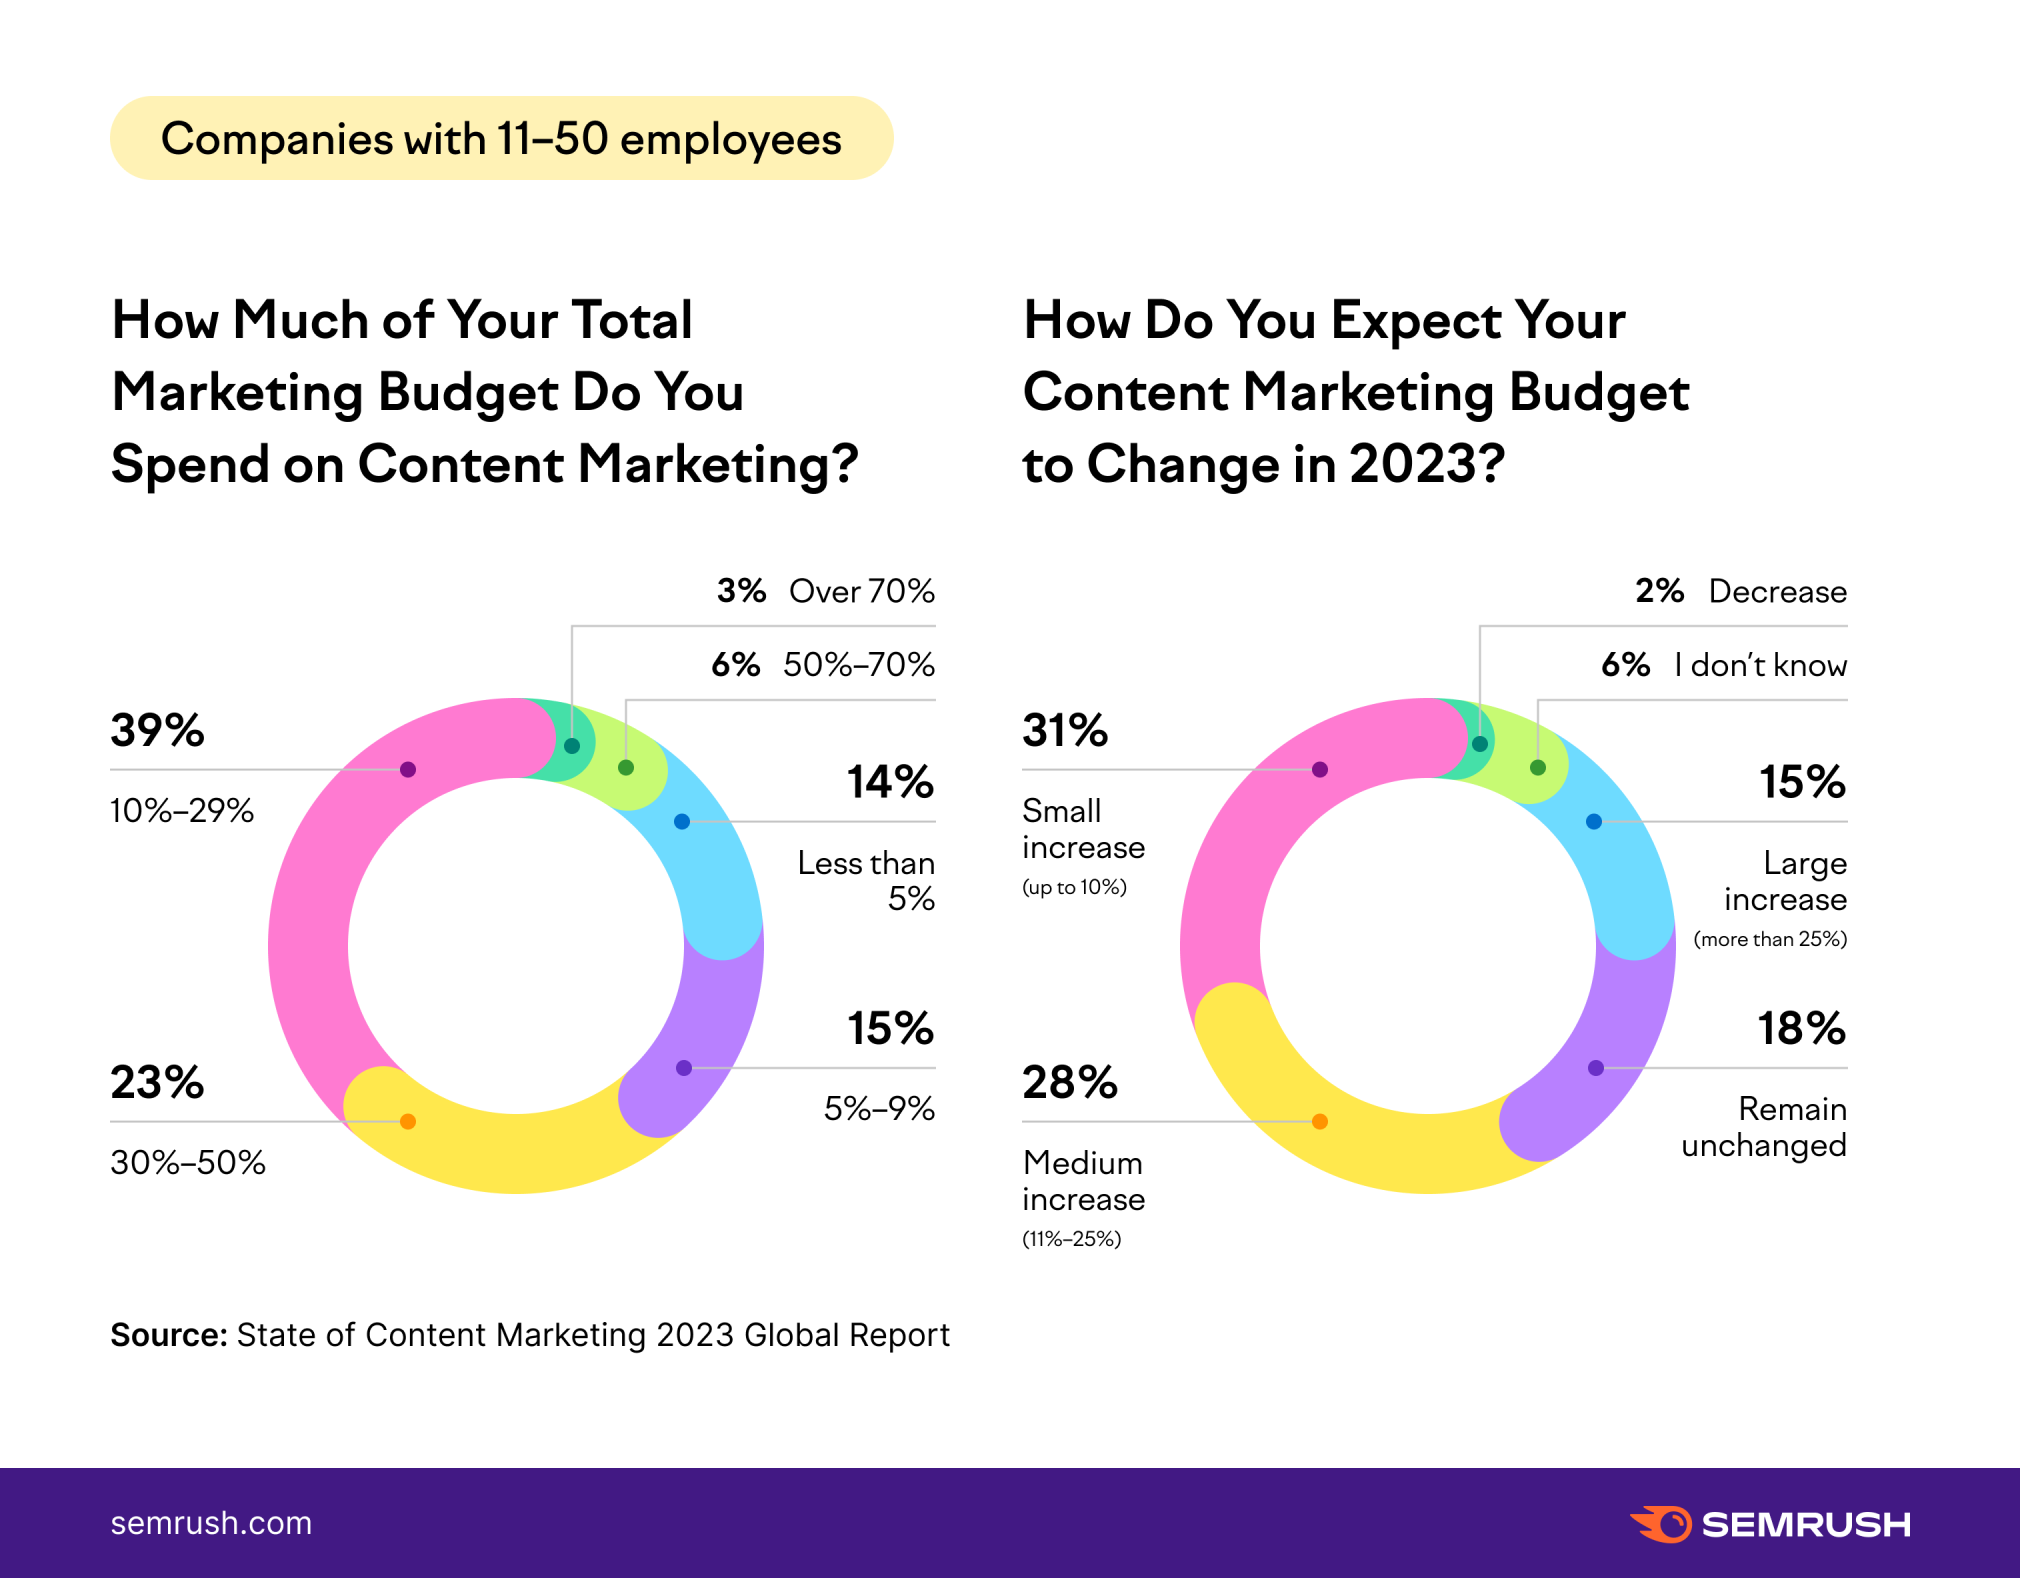 Small business content marketing budget plans in 2023